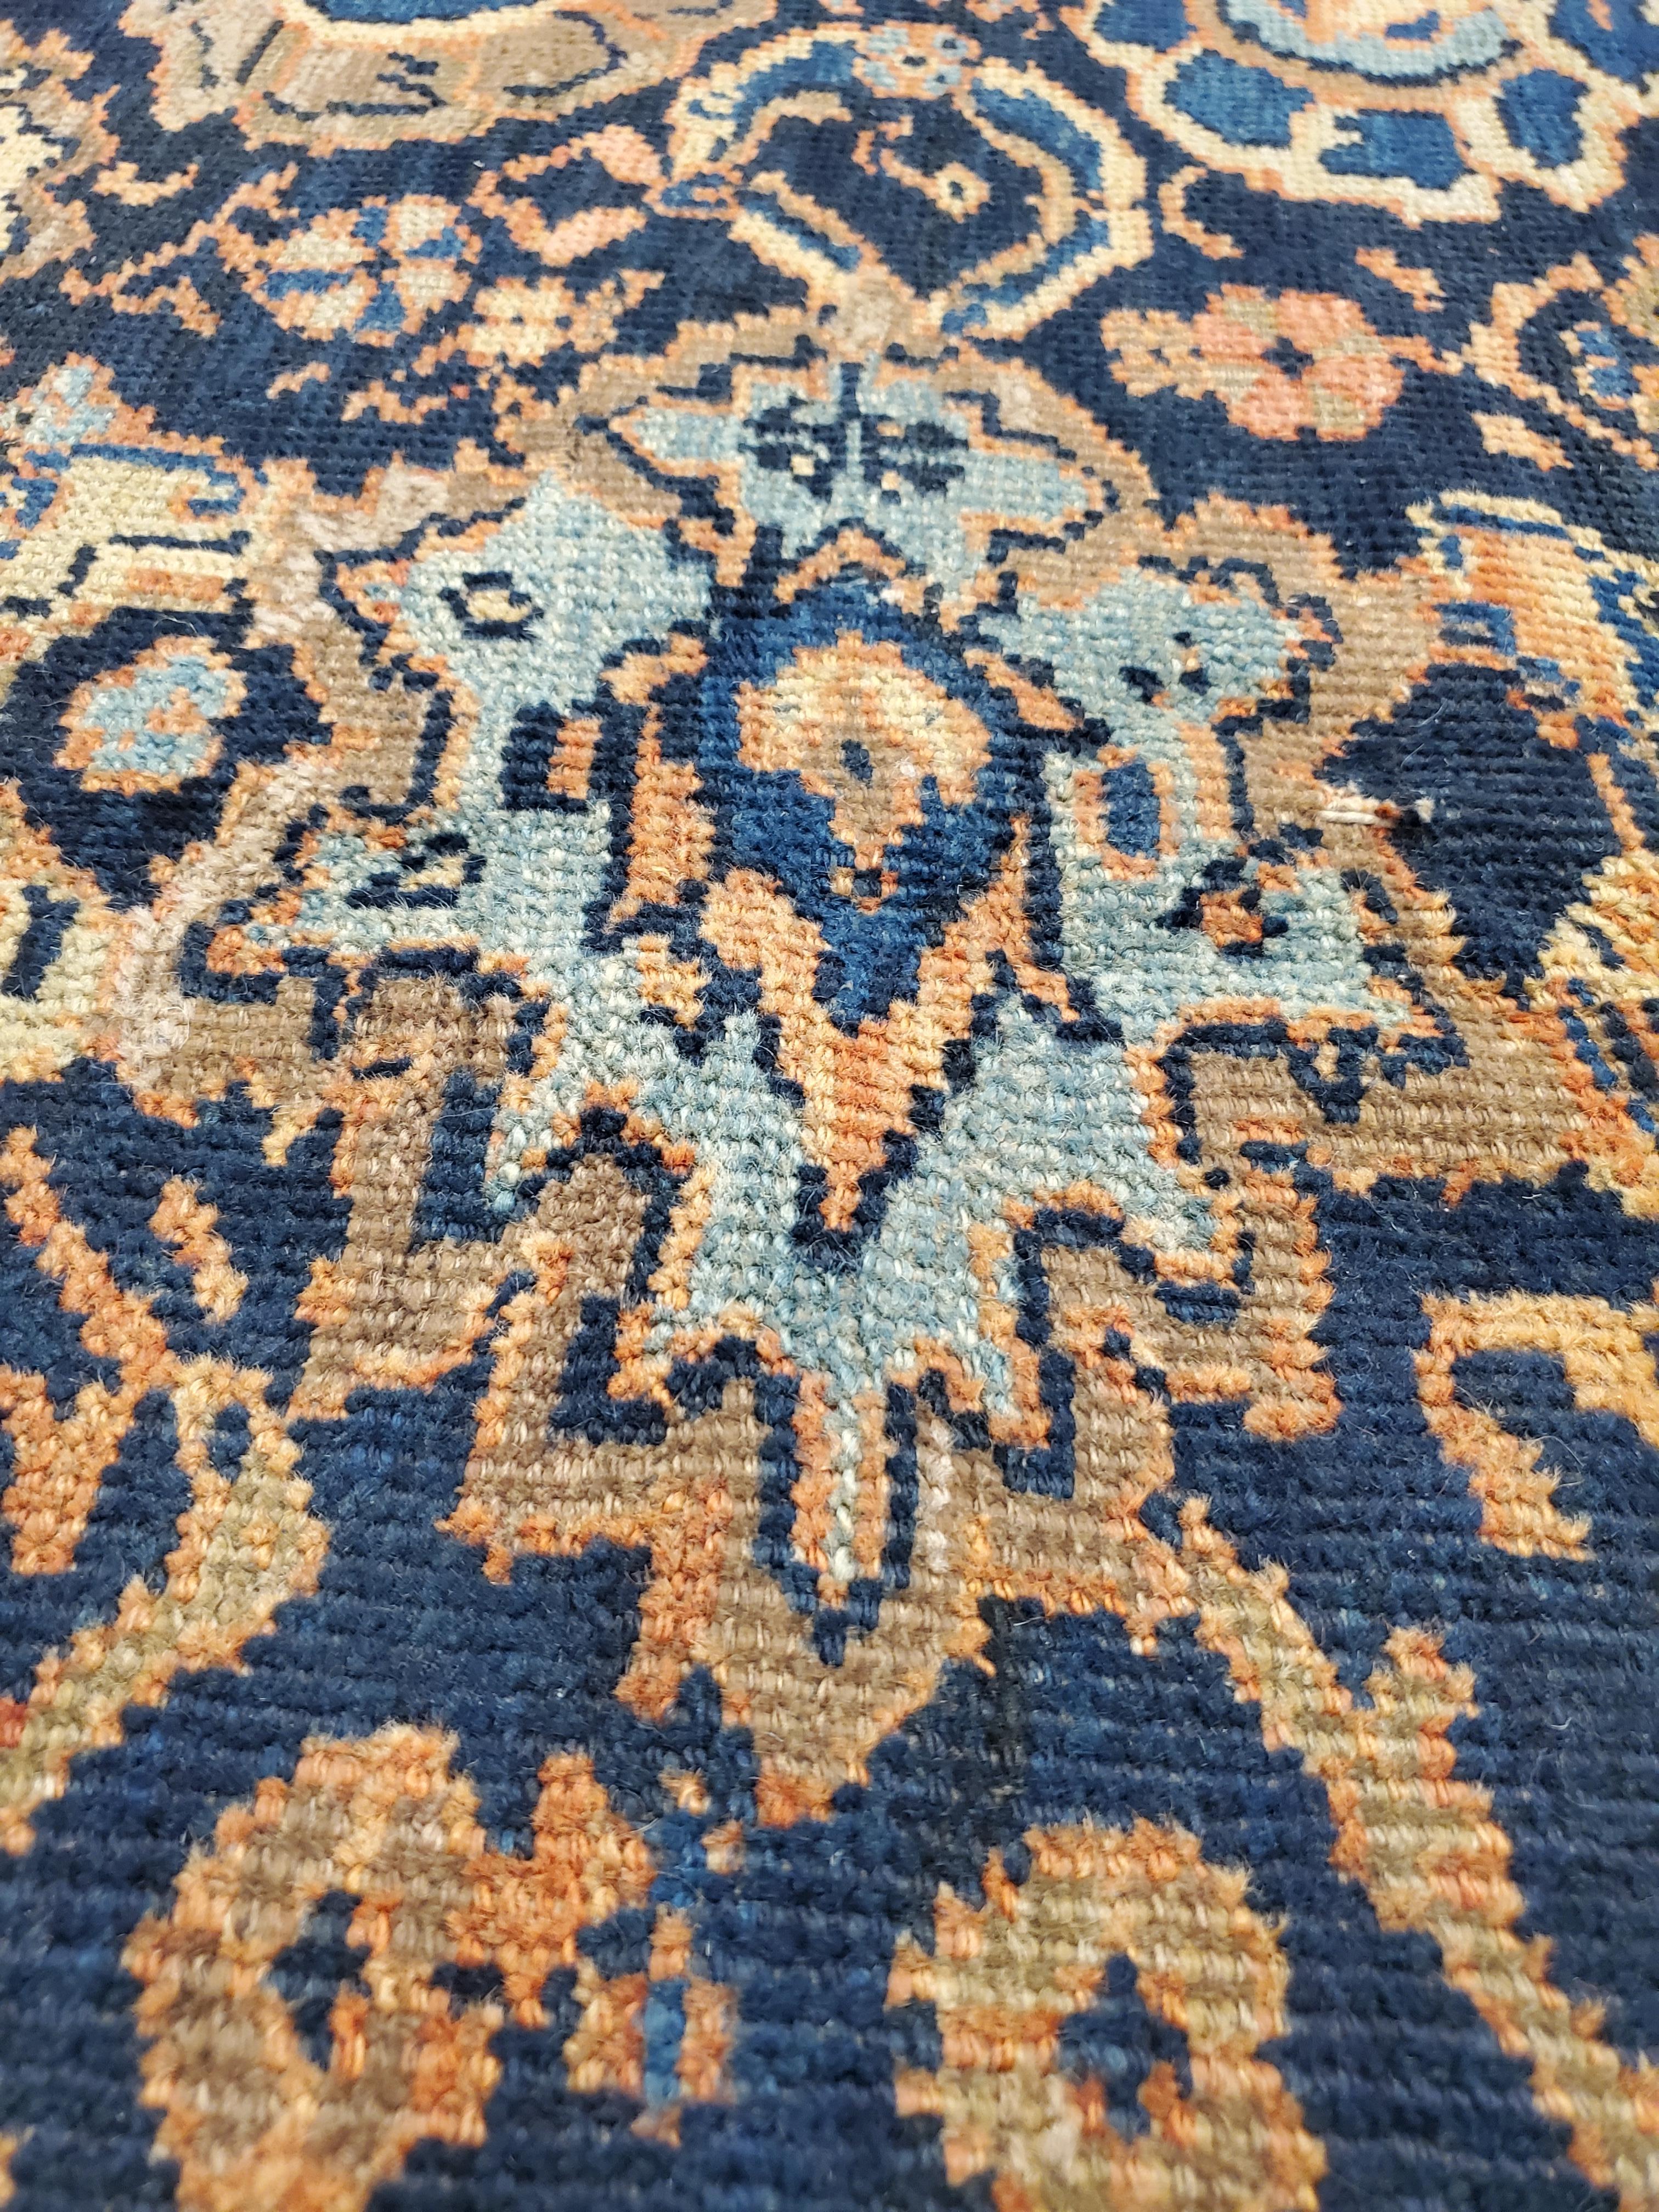 Antique Persian Sultanabad Carpet, Handmade Oriental Rug, Navy Blue, Rust, Gold In Excellent Condition For Sale In Port Washington, NY